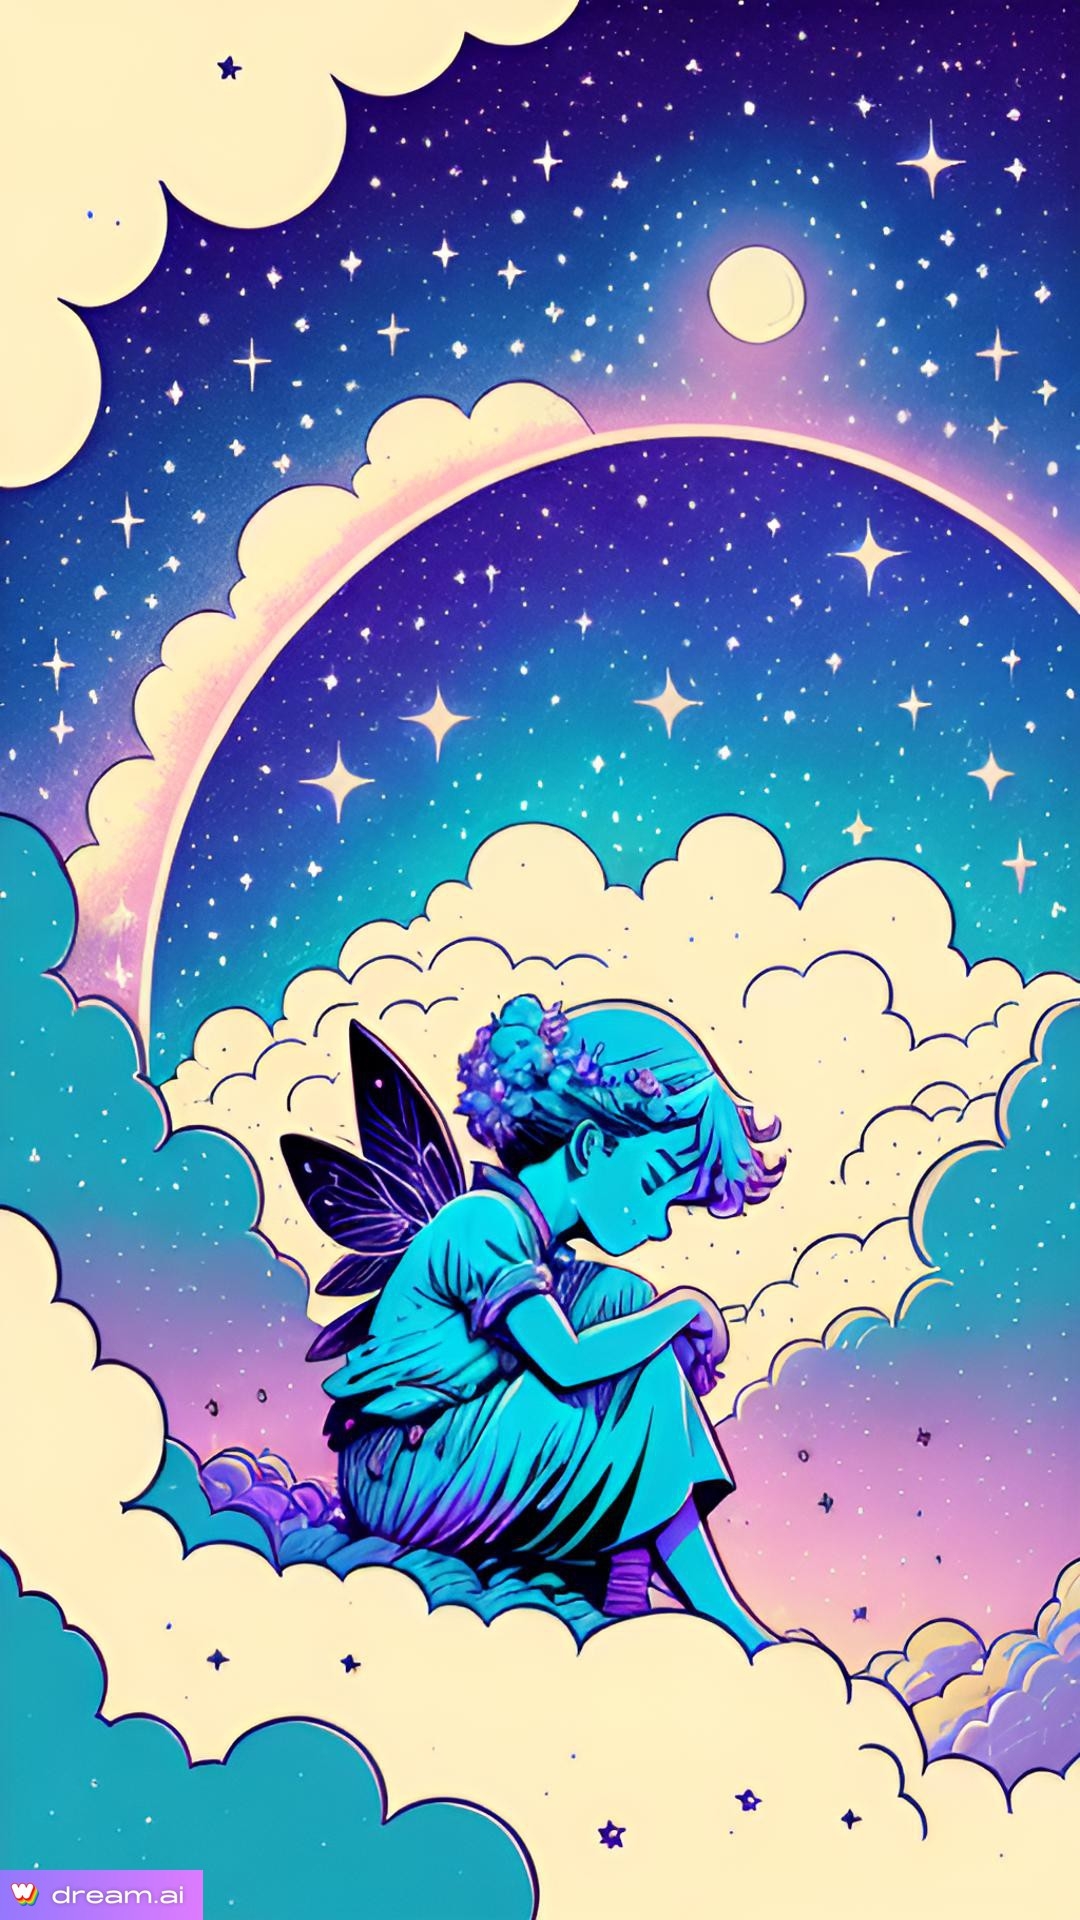 a cartoon of a girl with wings sitting on a cloud